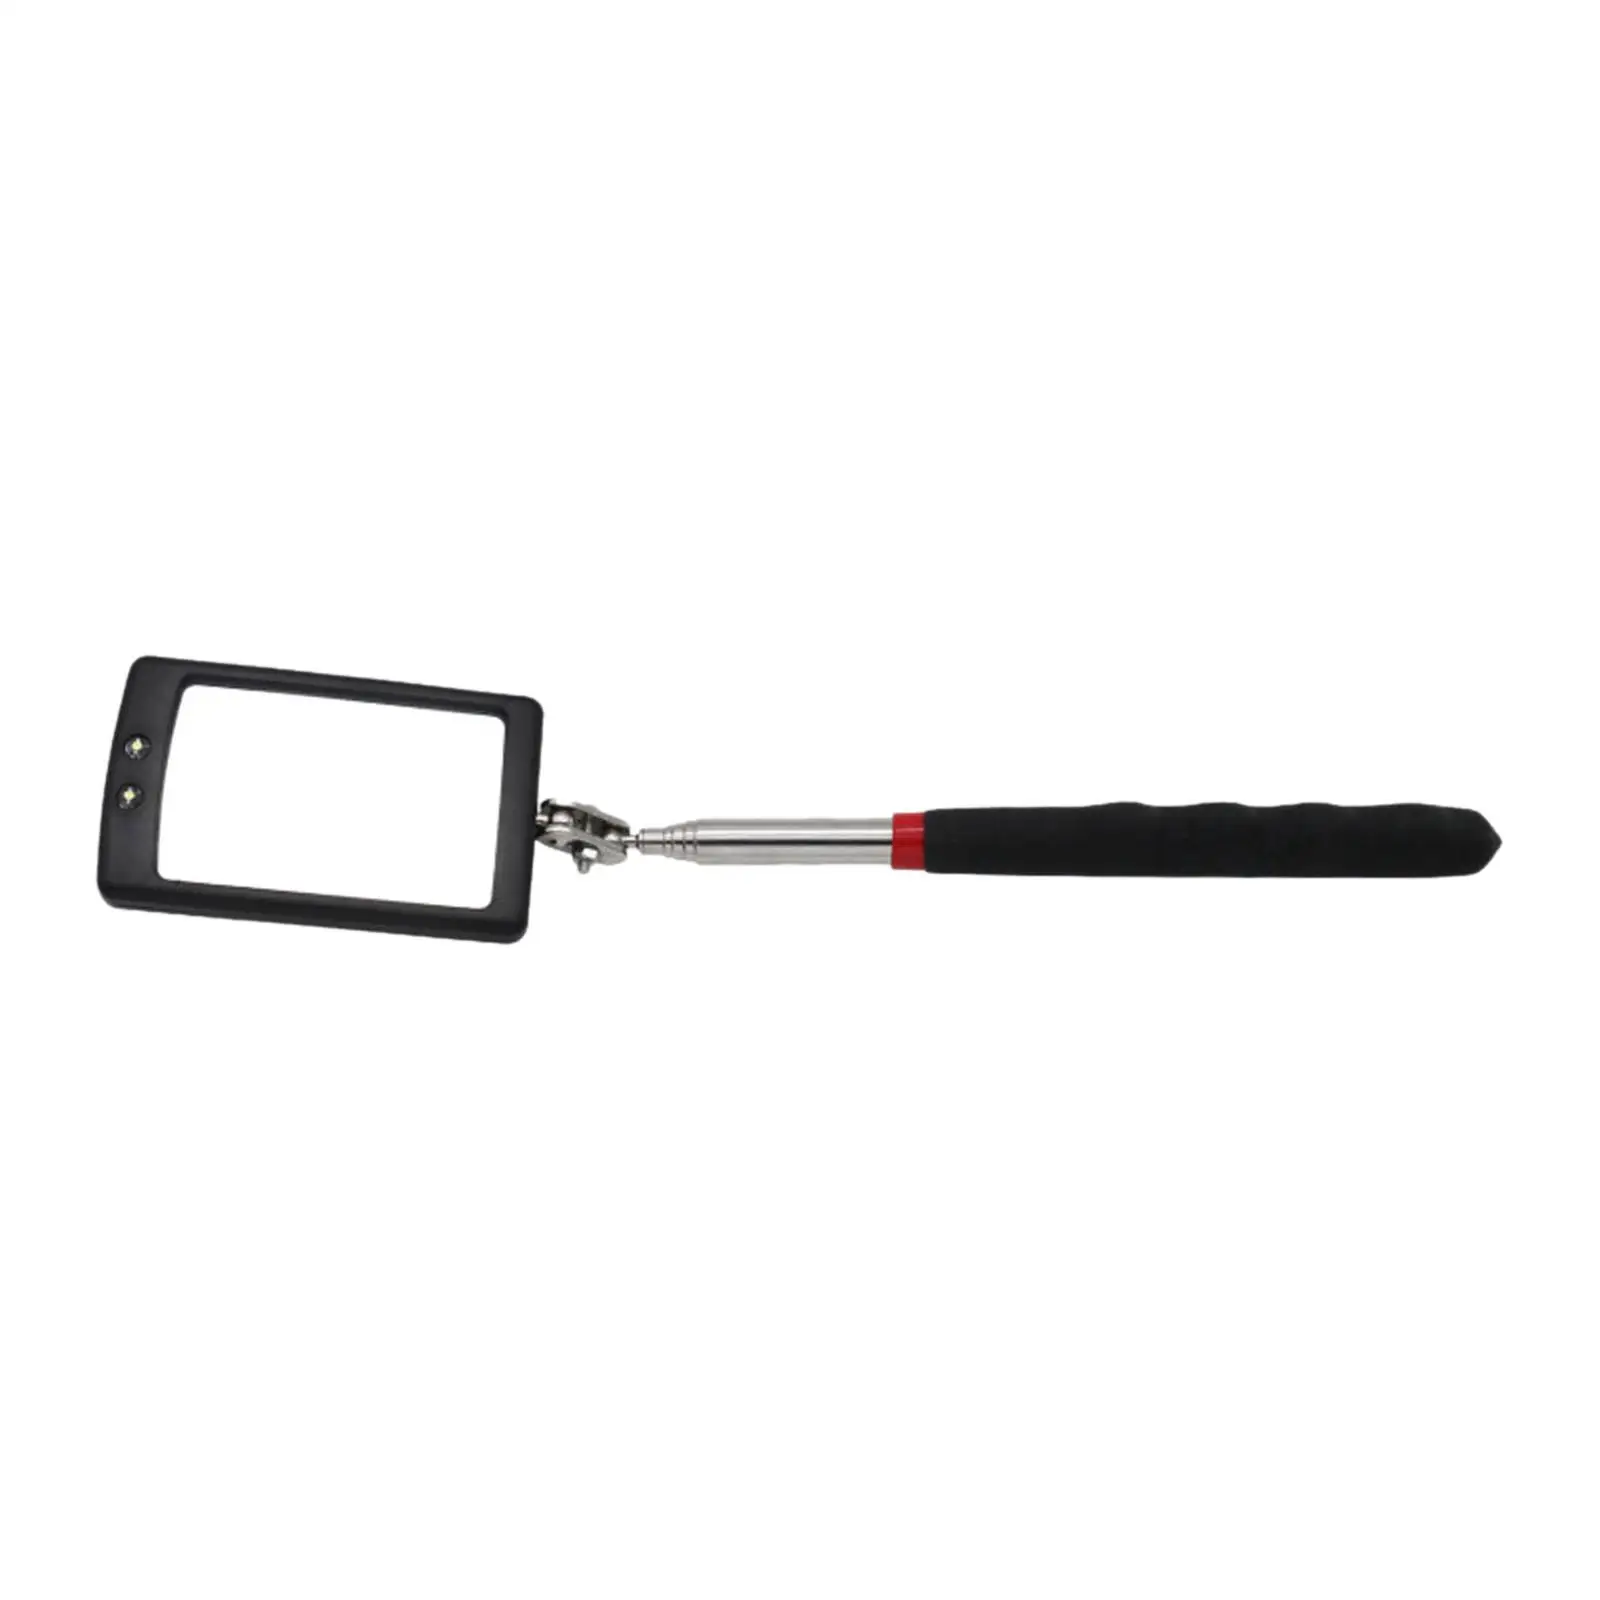 Inspection Mirror Telescoping Machine Inspection Mirror for Home Use Car Repair Eyelashes Small Parts Observation Home Inspector